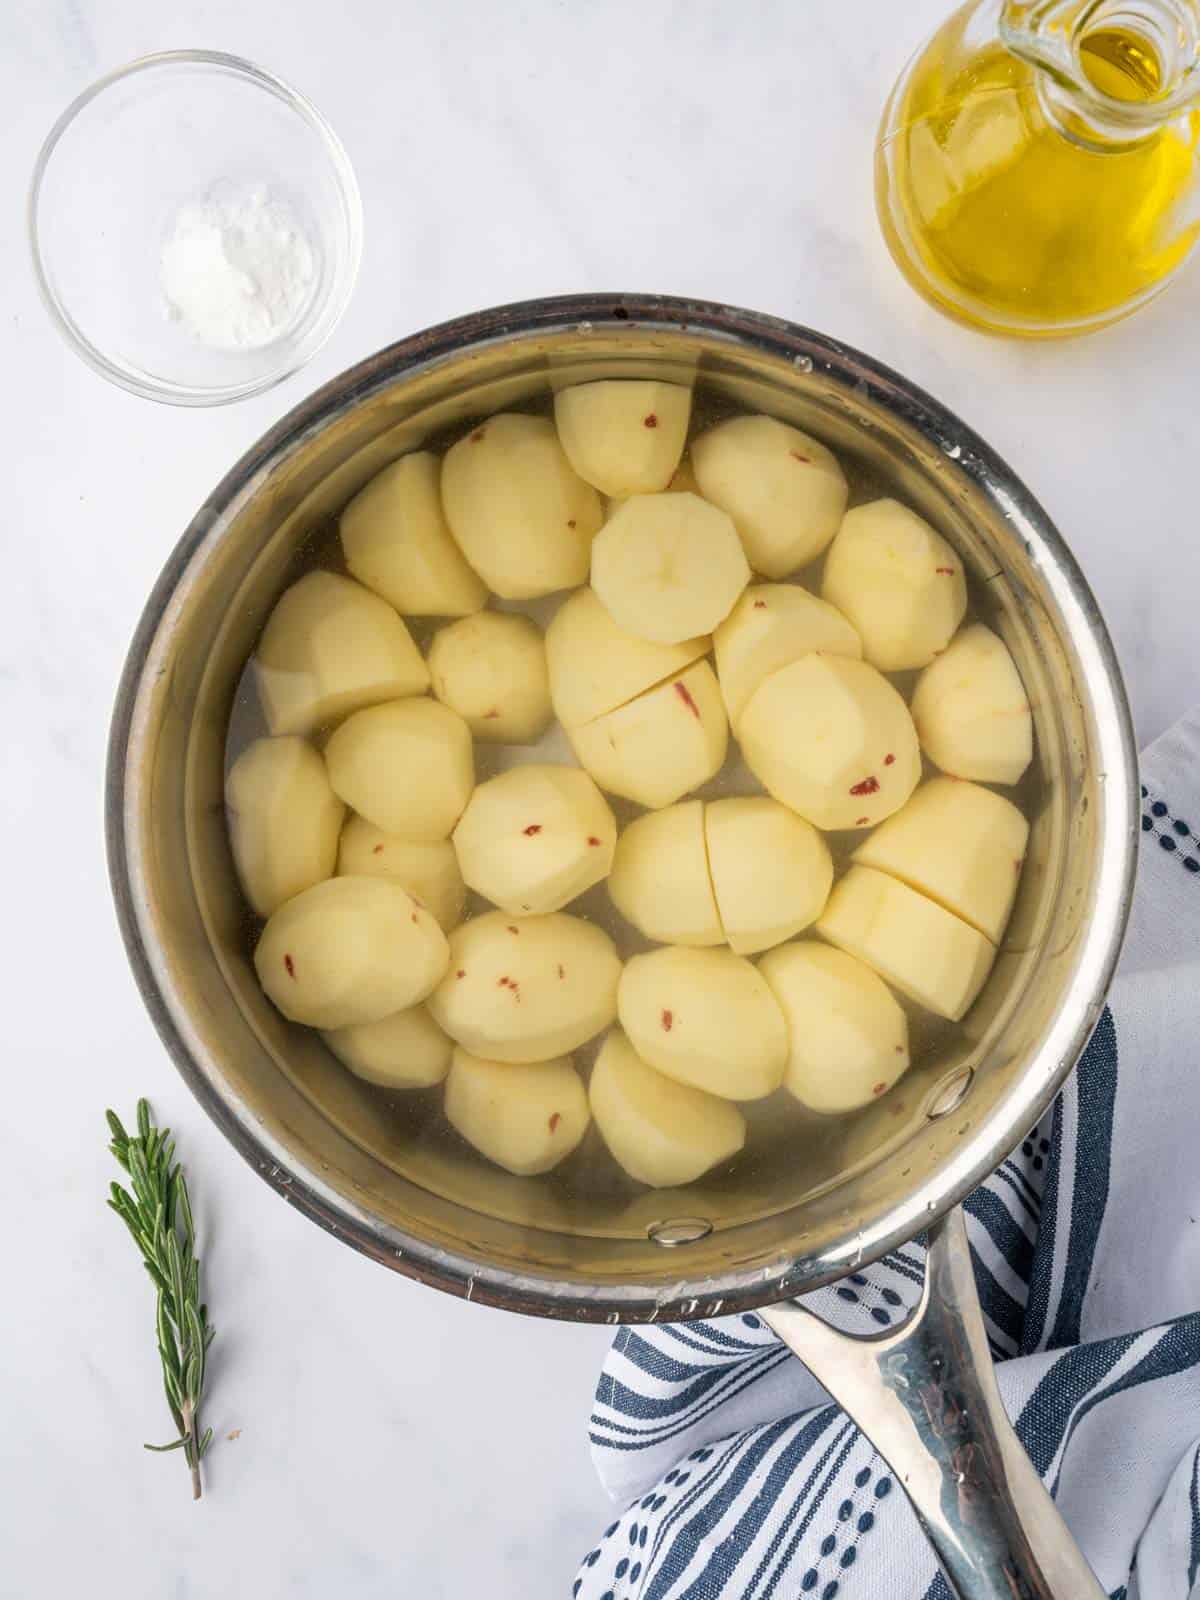 Potatoes are boiled in salted water with baking soda.